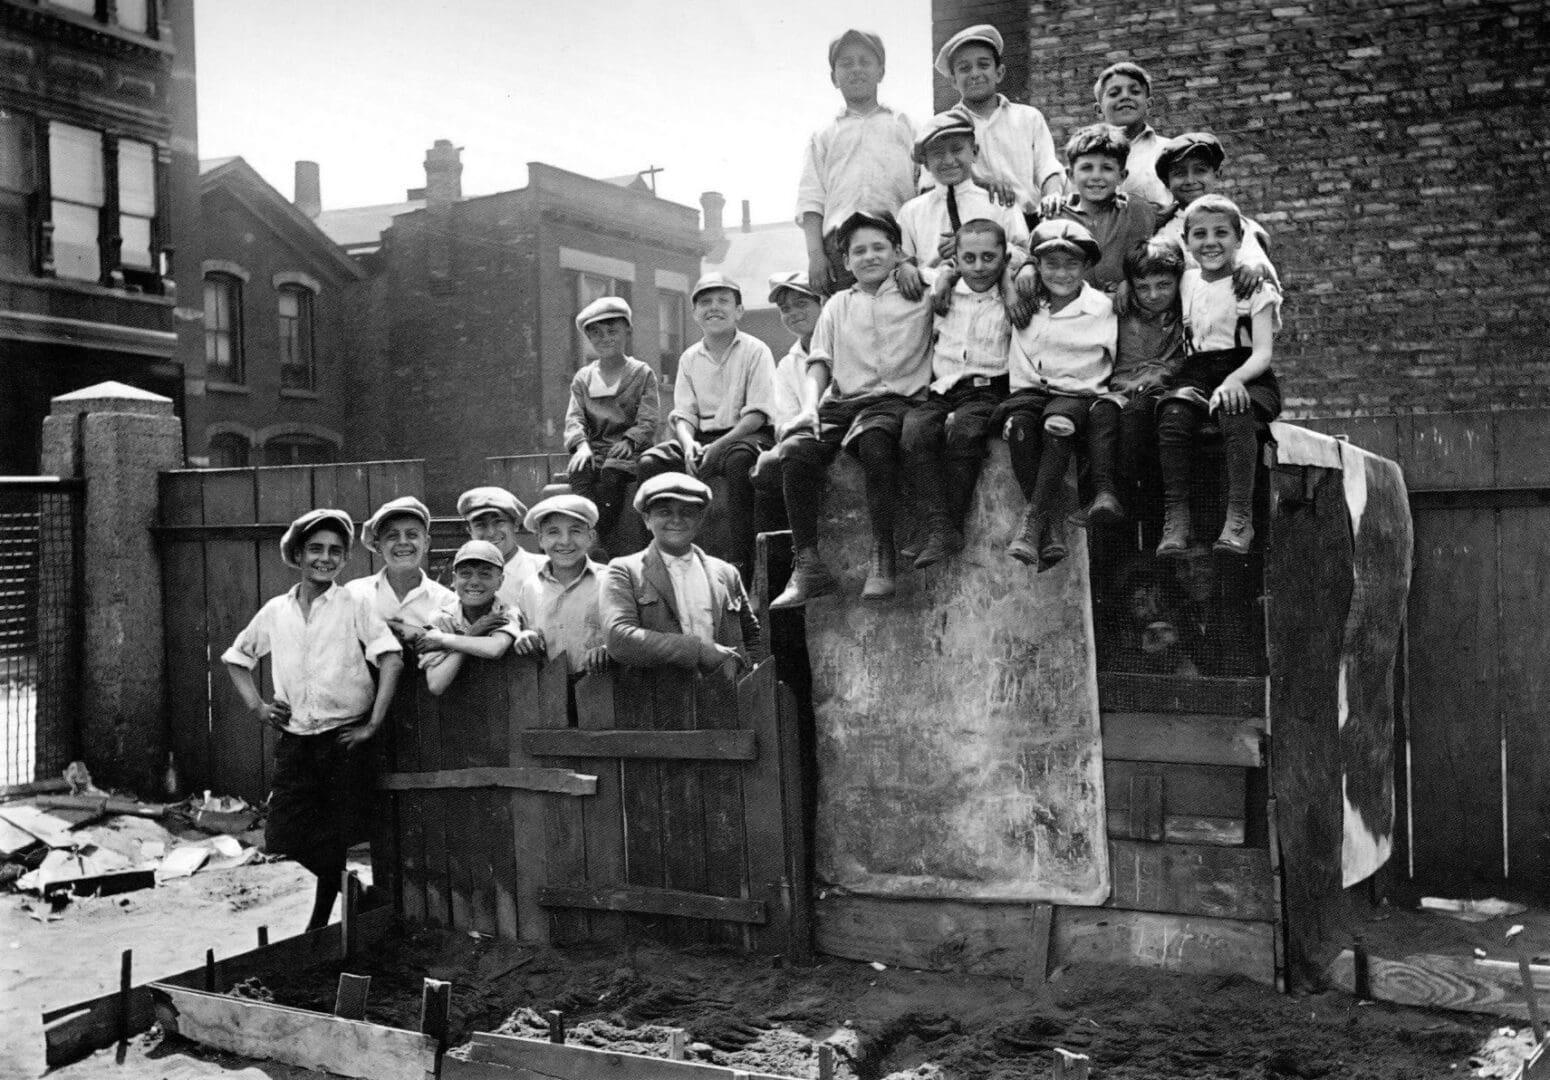 A group of children sitting on top of steps.